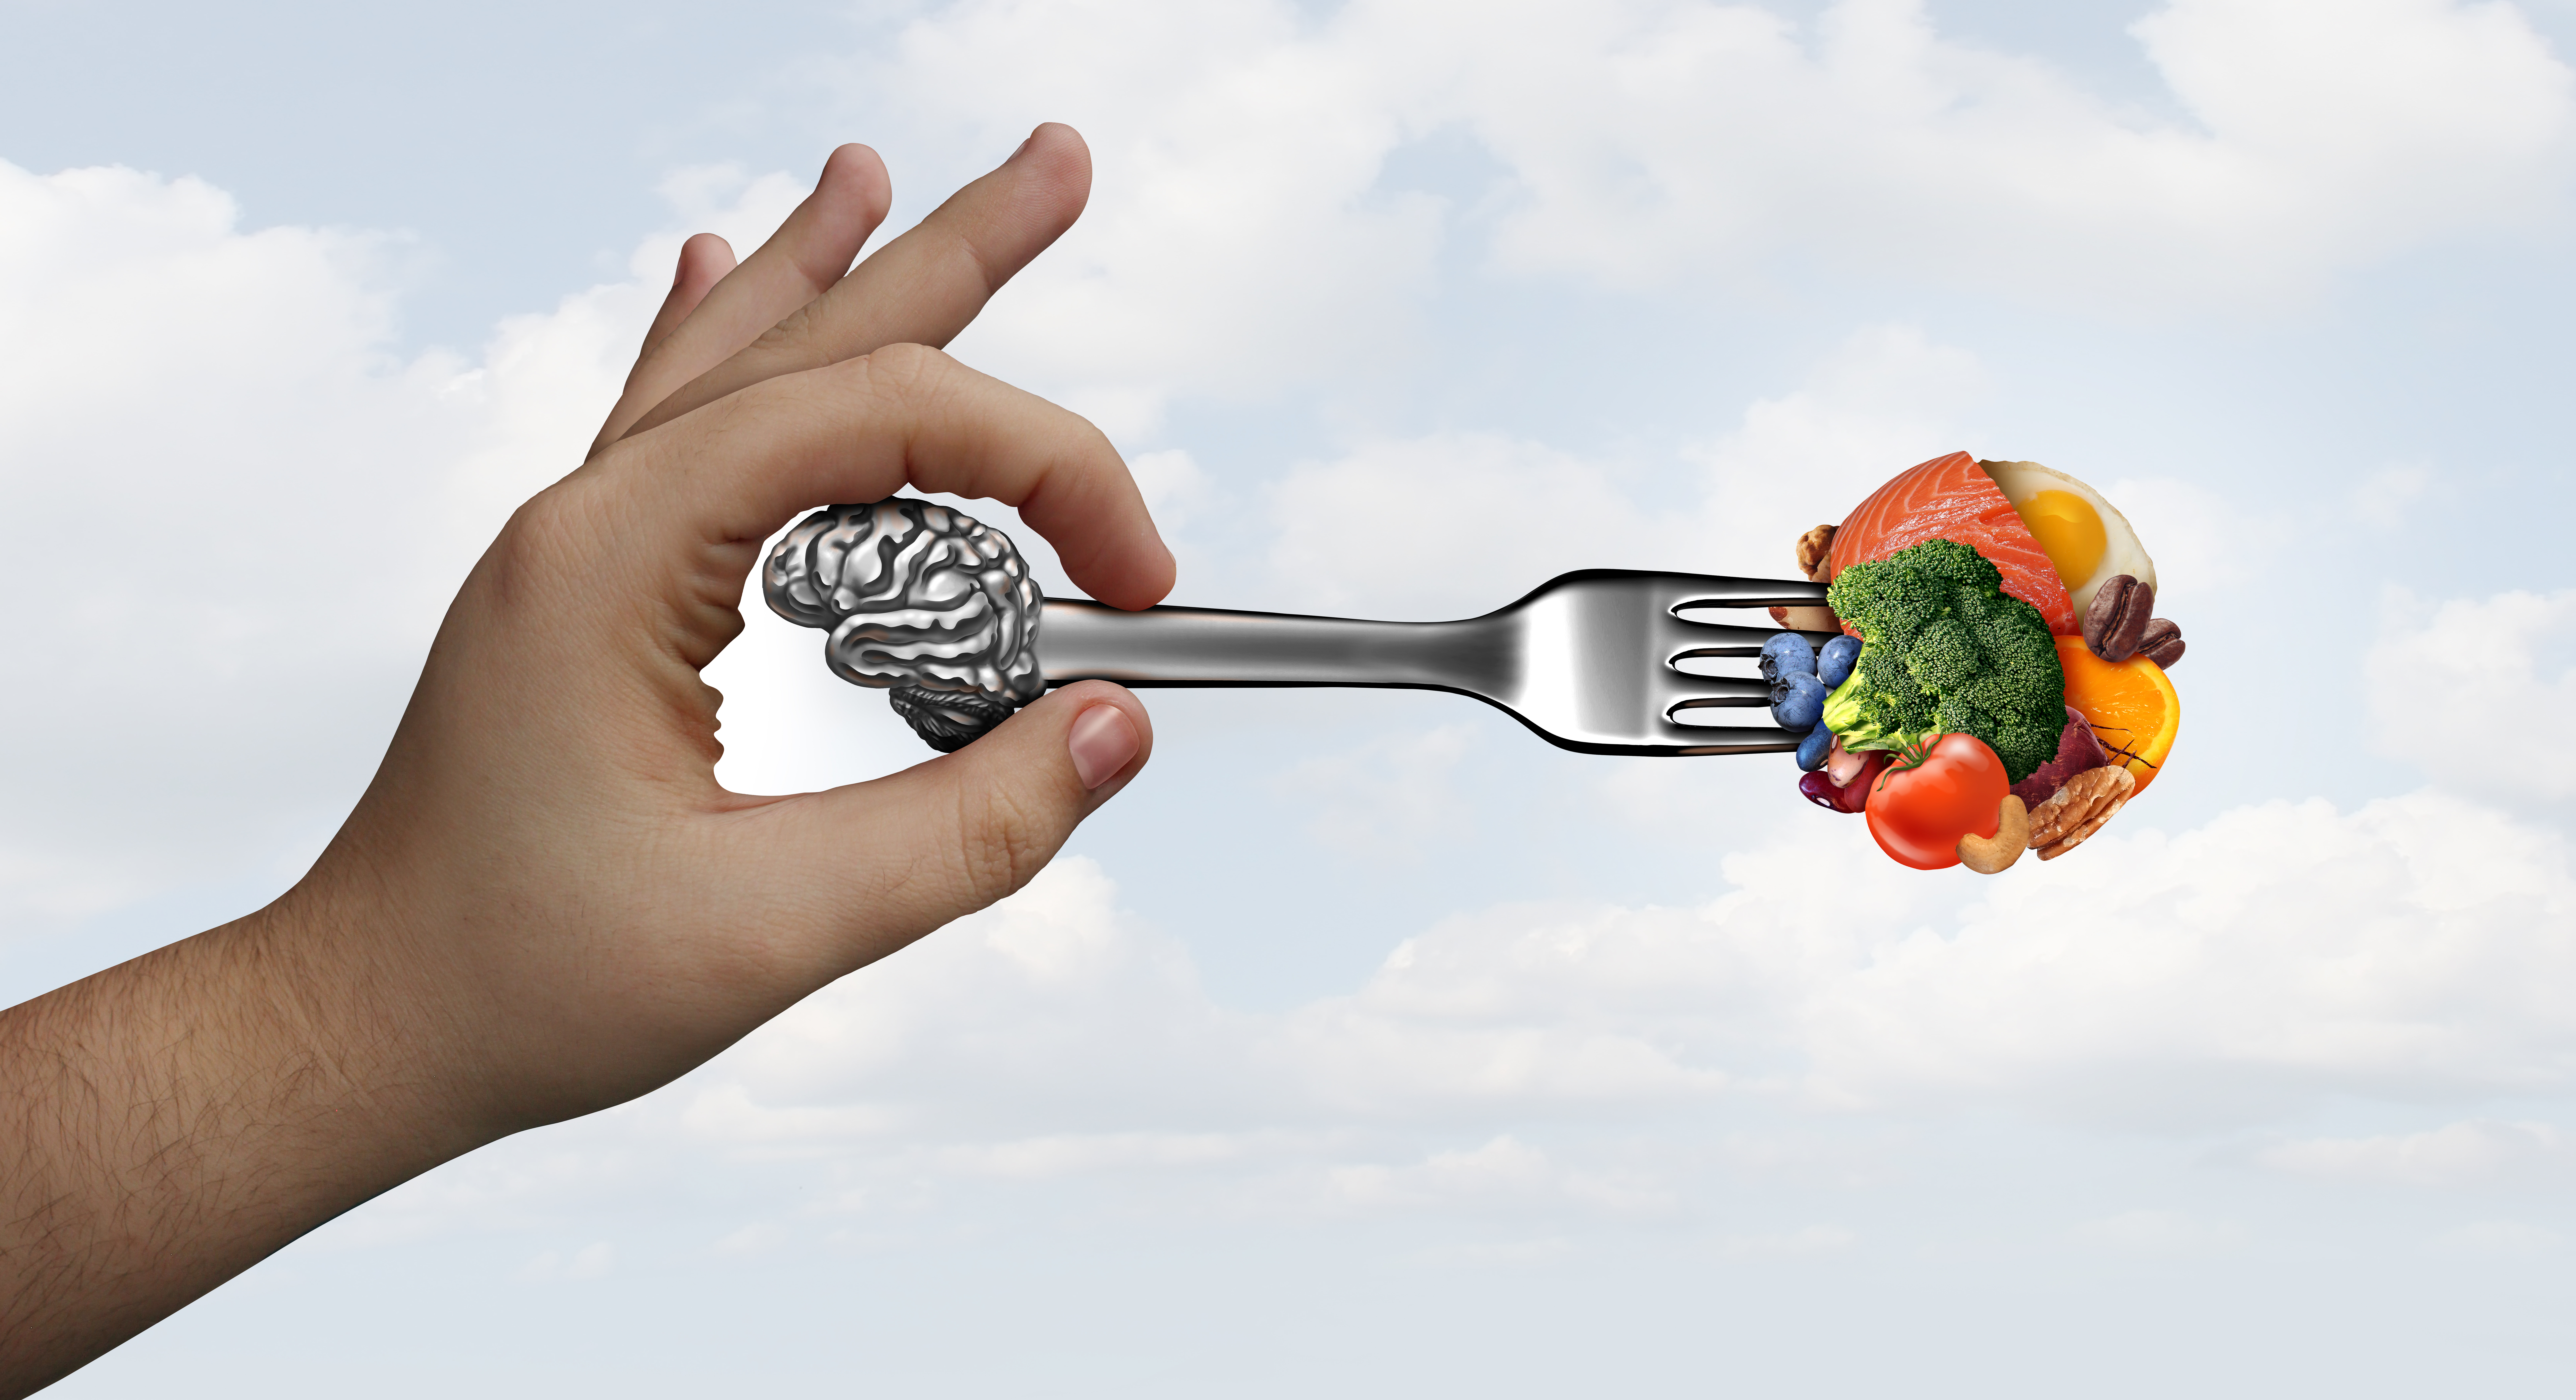 Image depicts brain food by showing a fork with healthy food on it and a human brain on the handle.